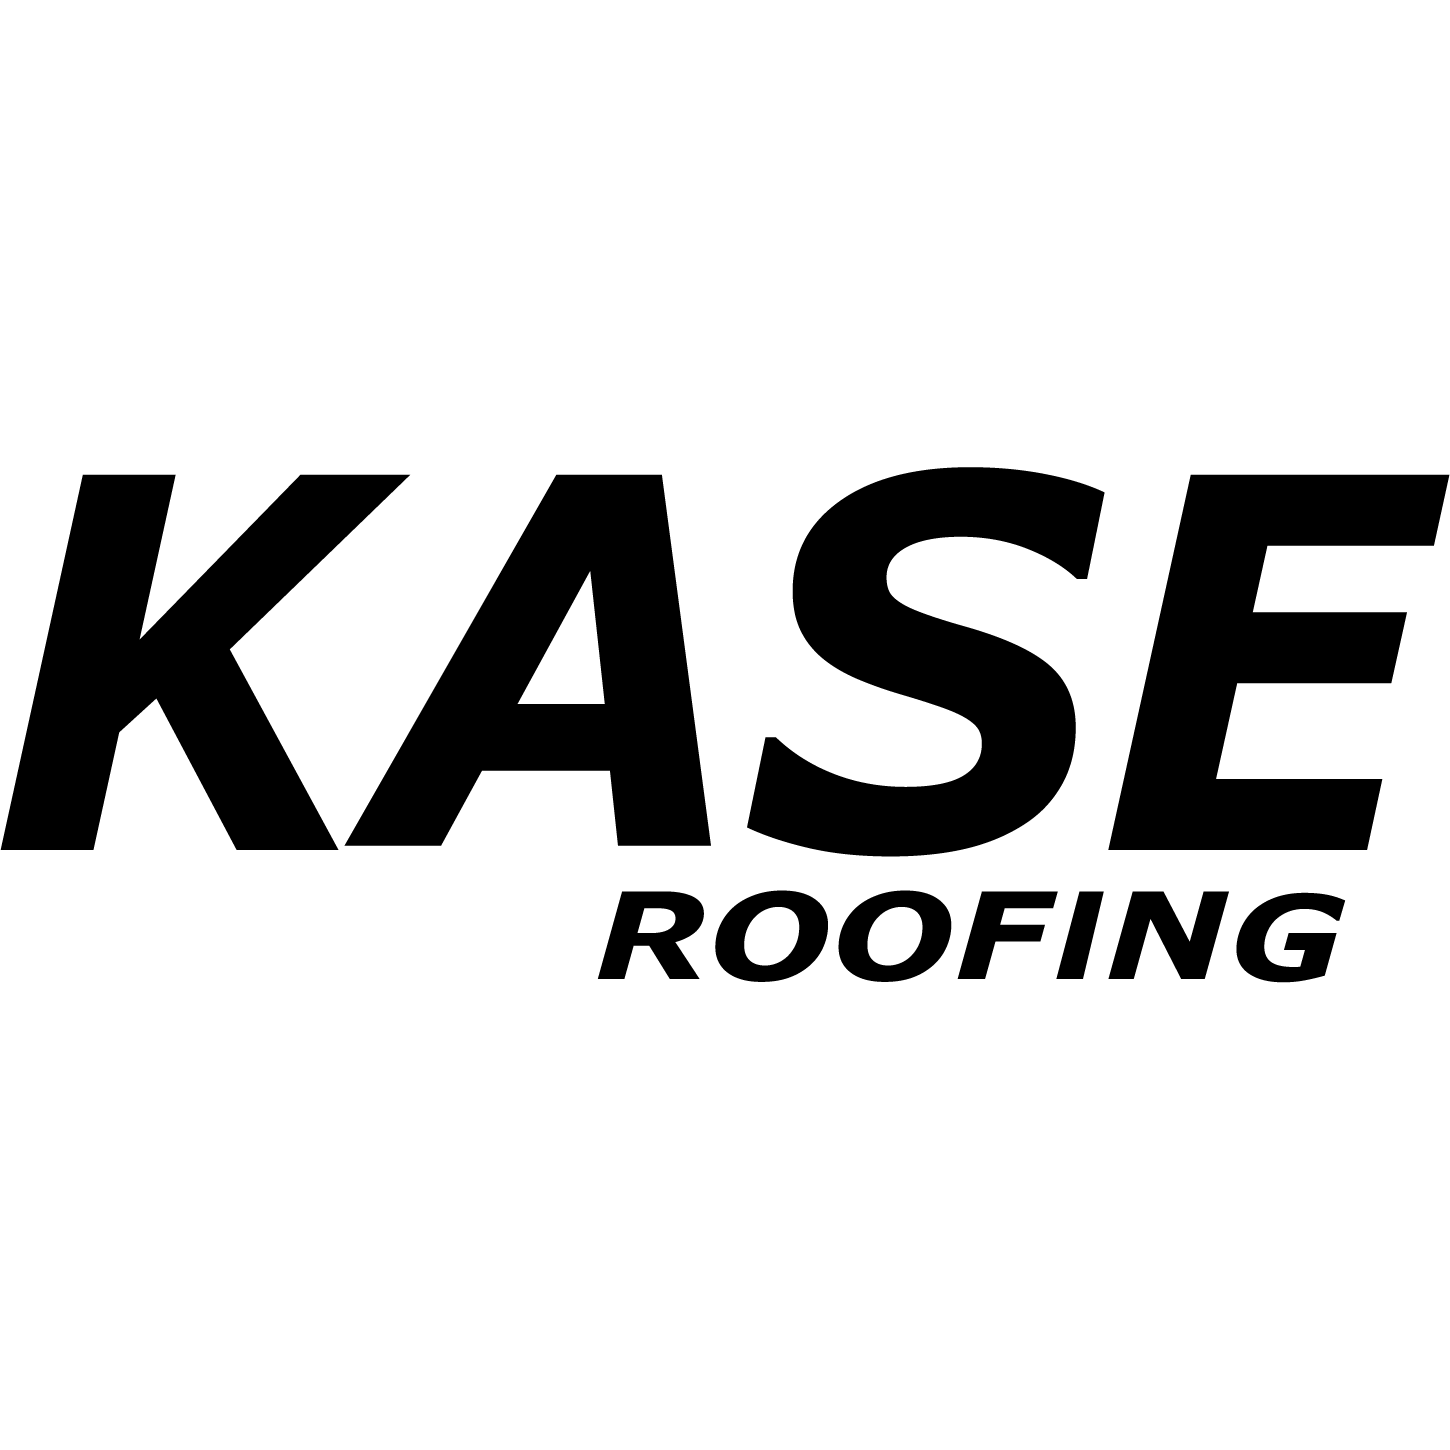 Kase Roofing - Pickerington, OH 43147 - (614)668-8351 | ShowMeLocal.com